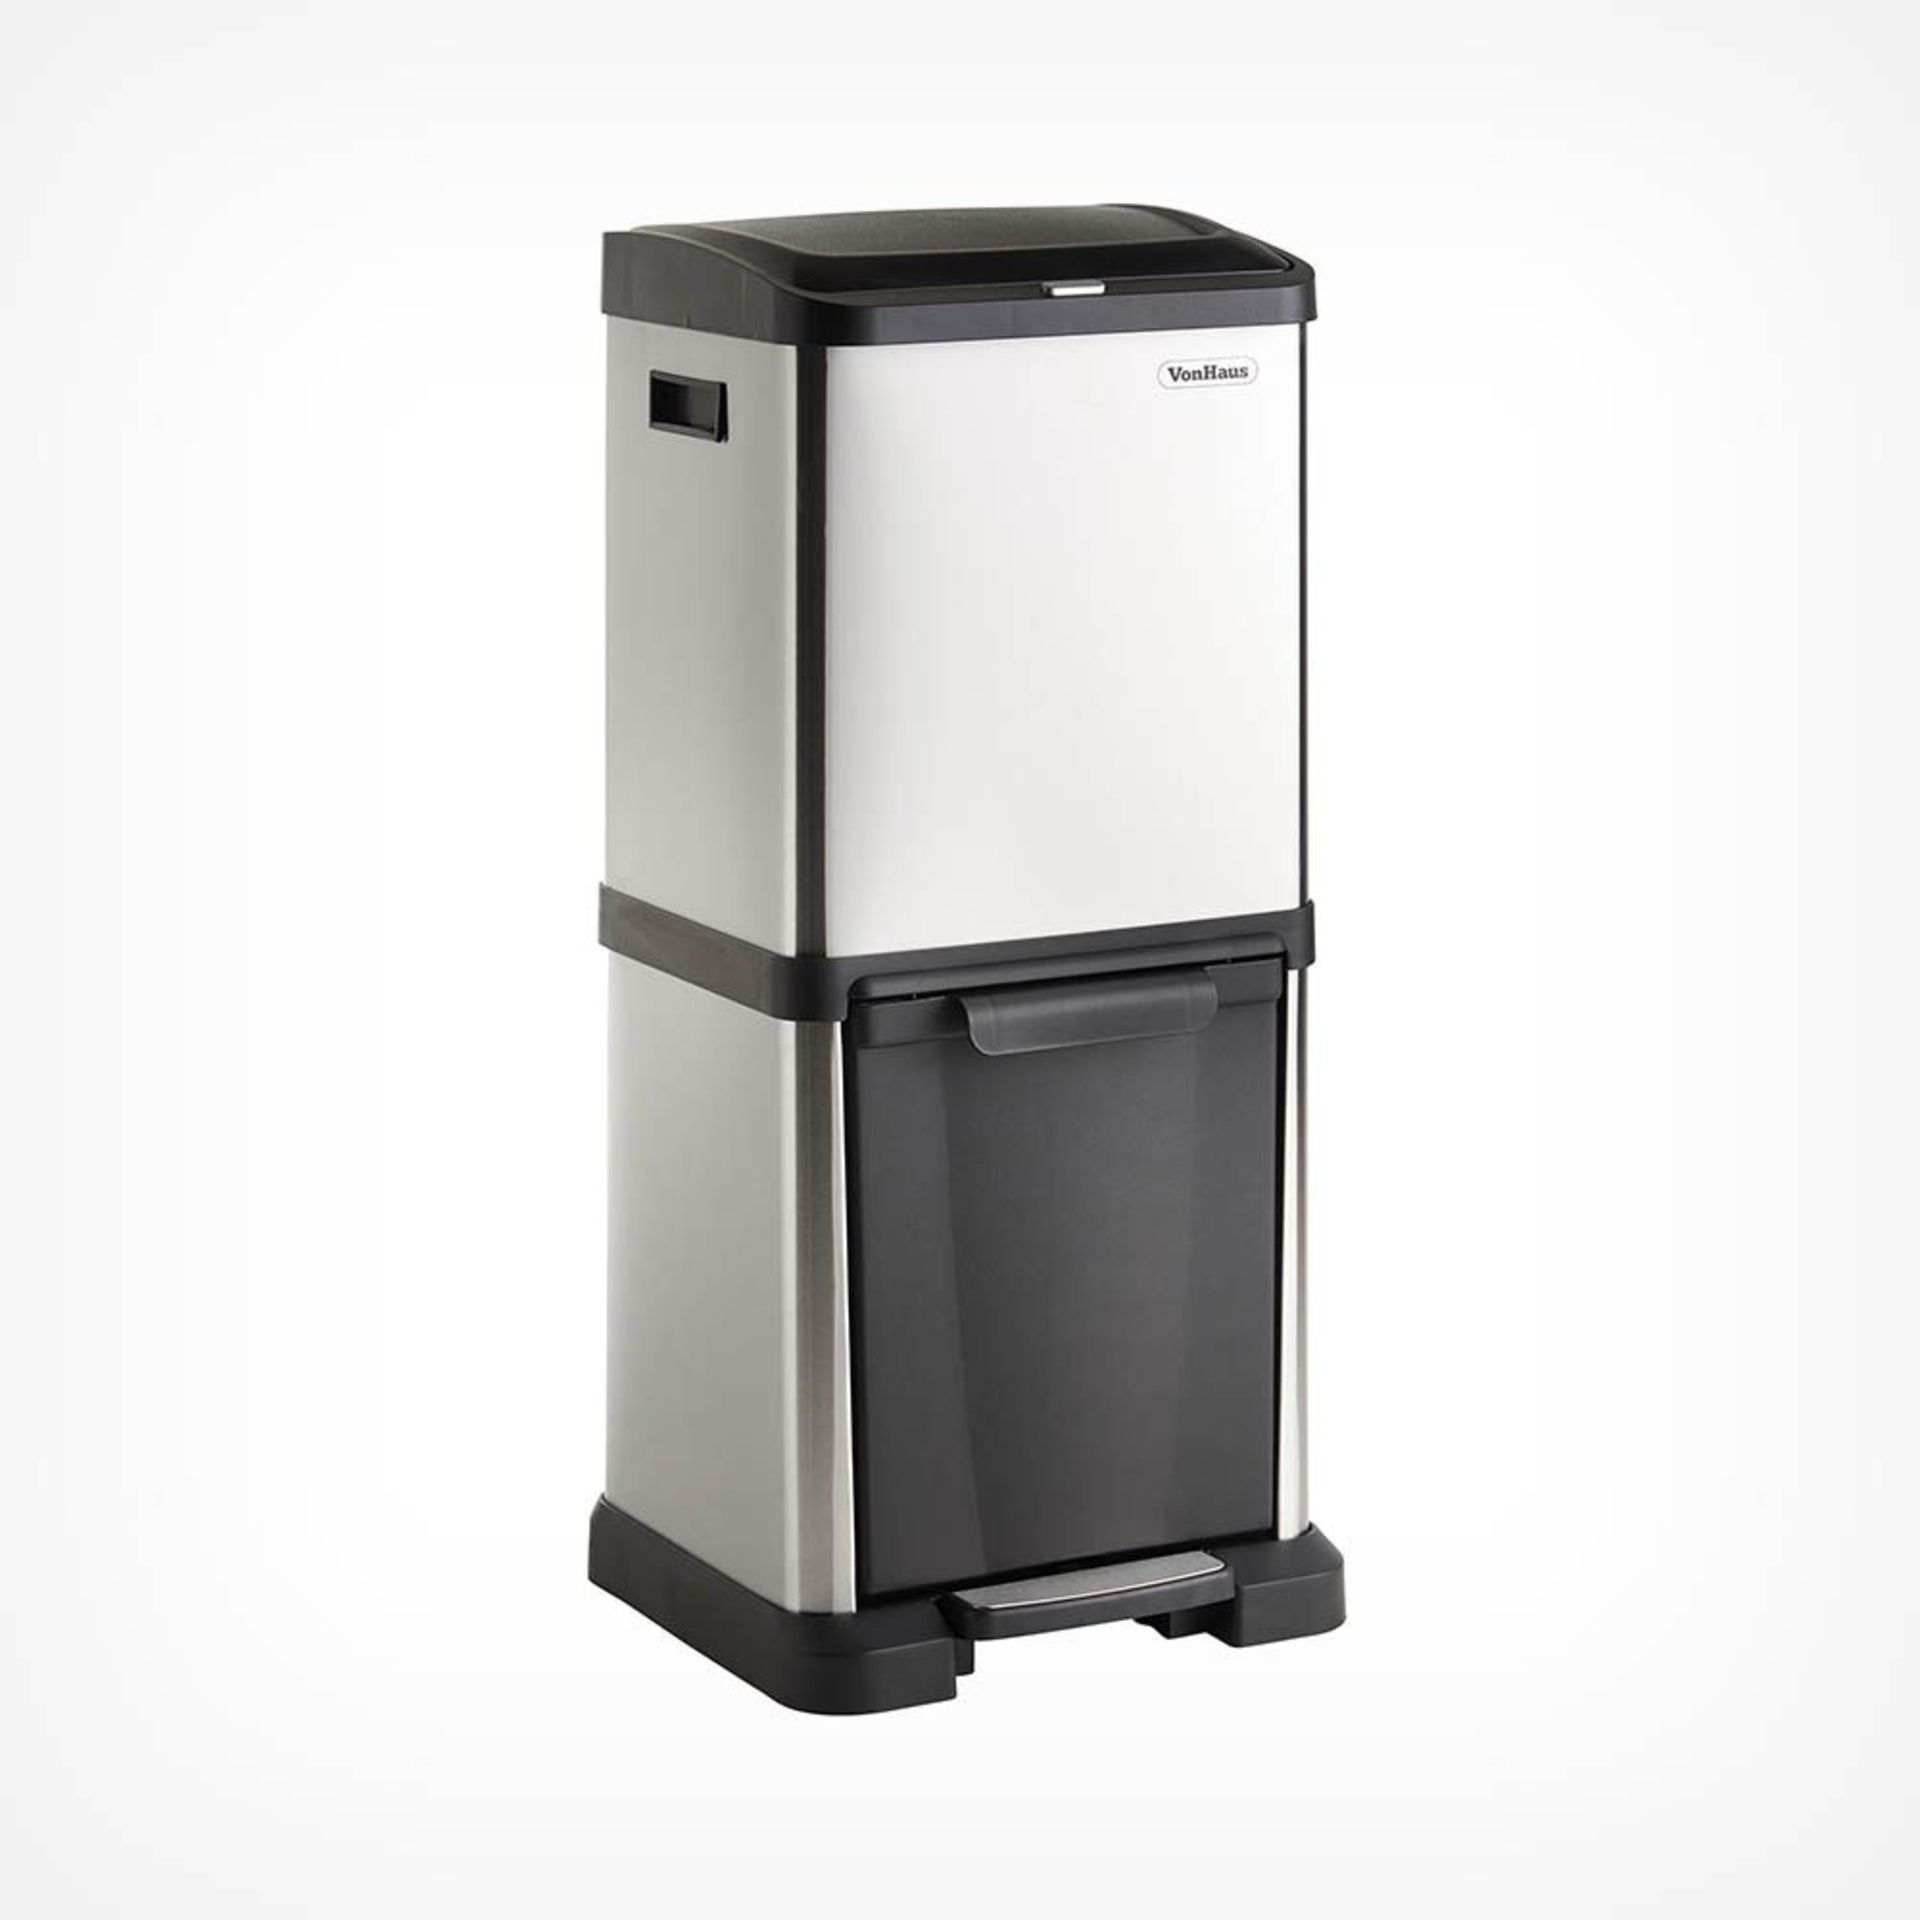 34L Stainless Steel Recycle Bin. - S2. This vertically designed waste separation system offers a